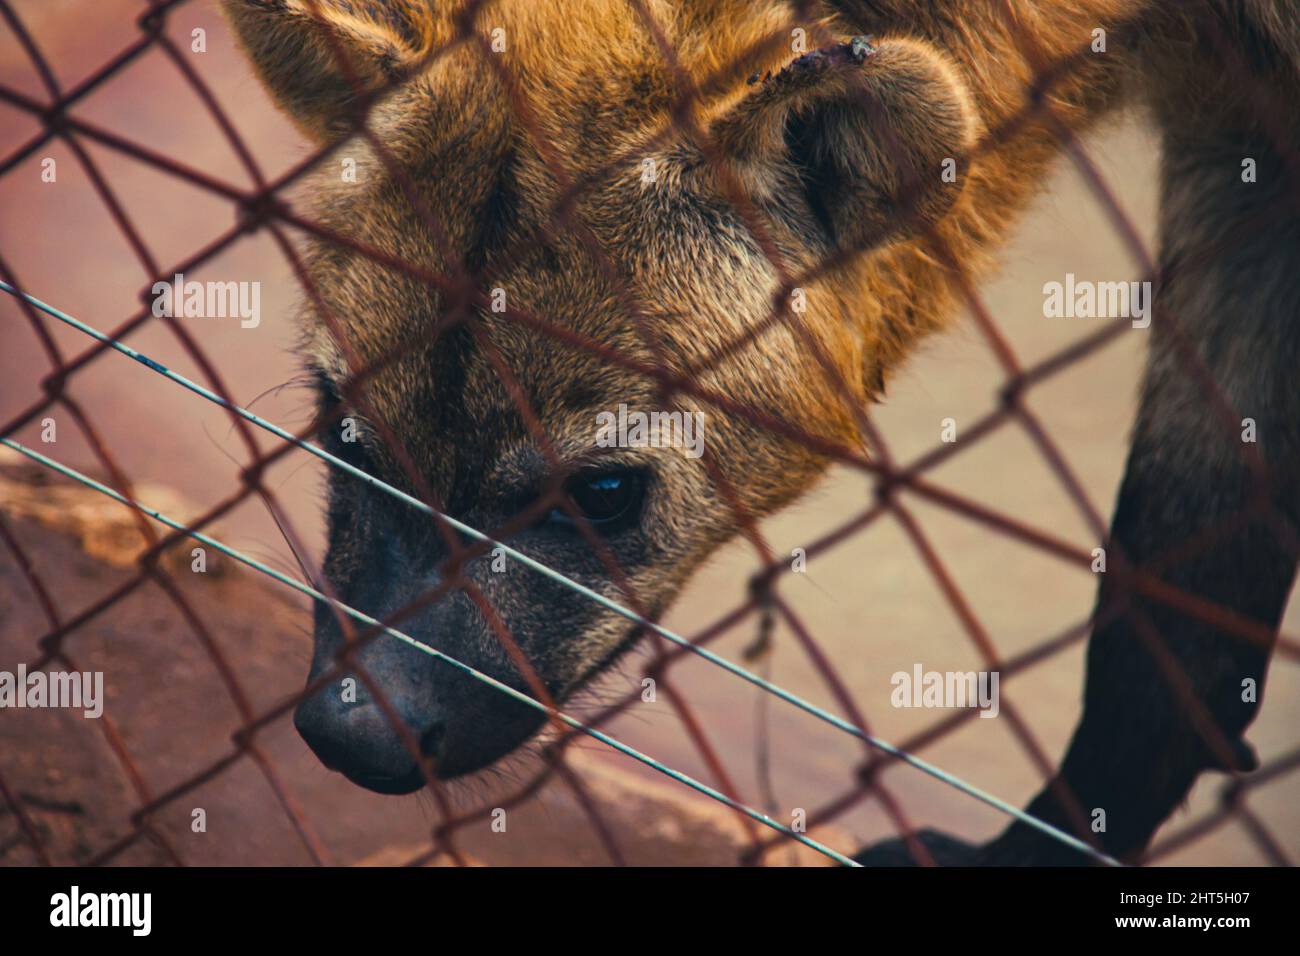 Closeup shot of a hiena in a cage Stock Photo